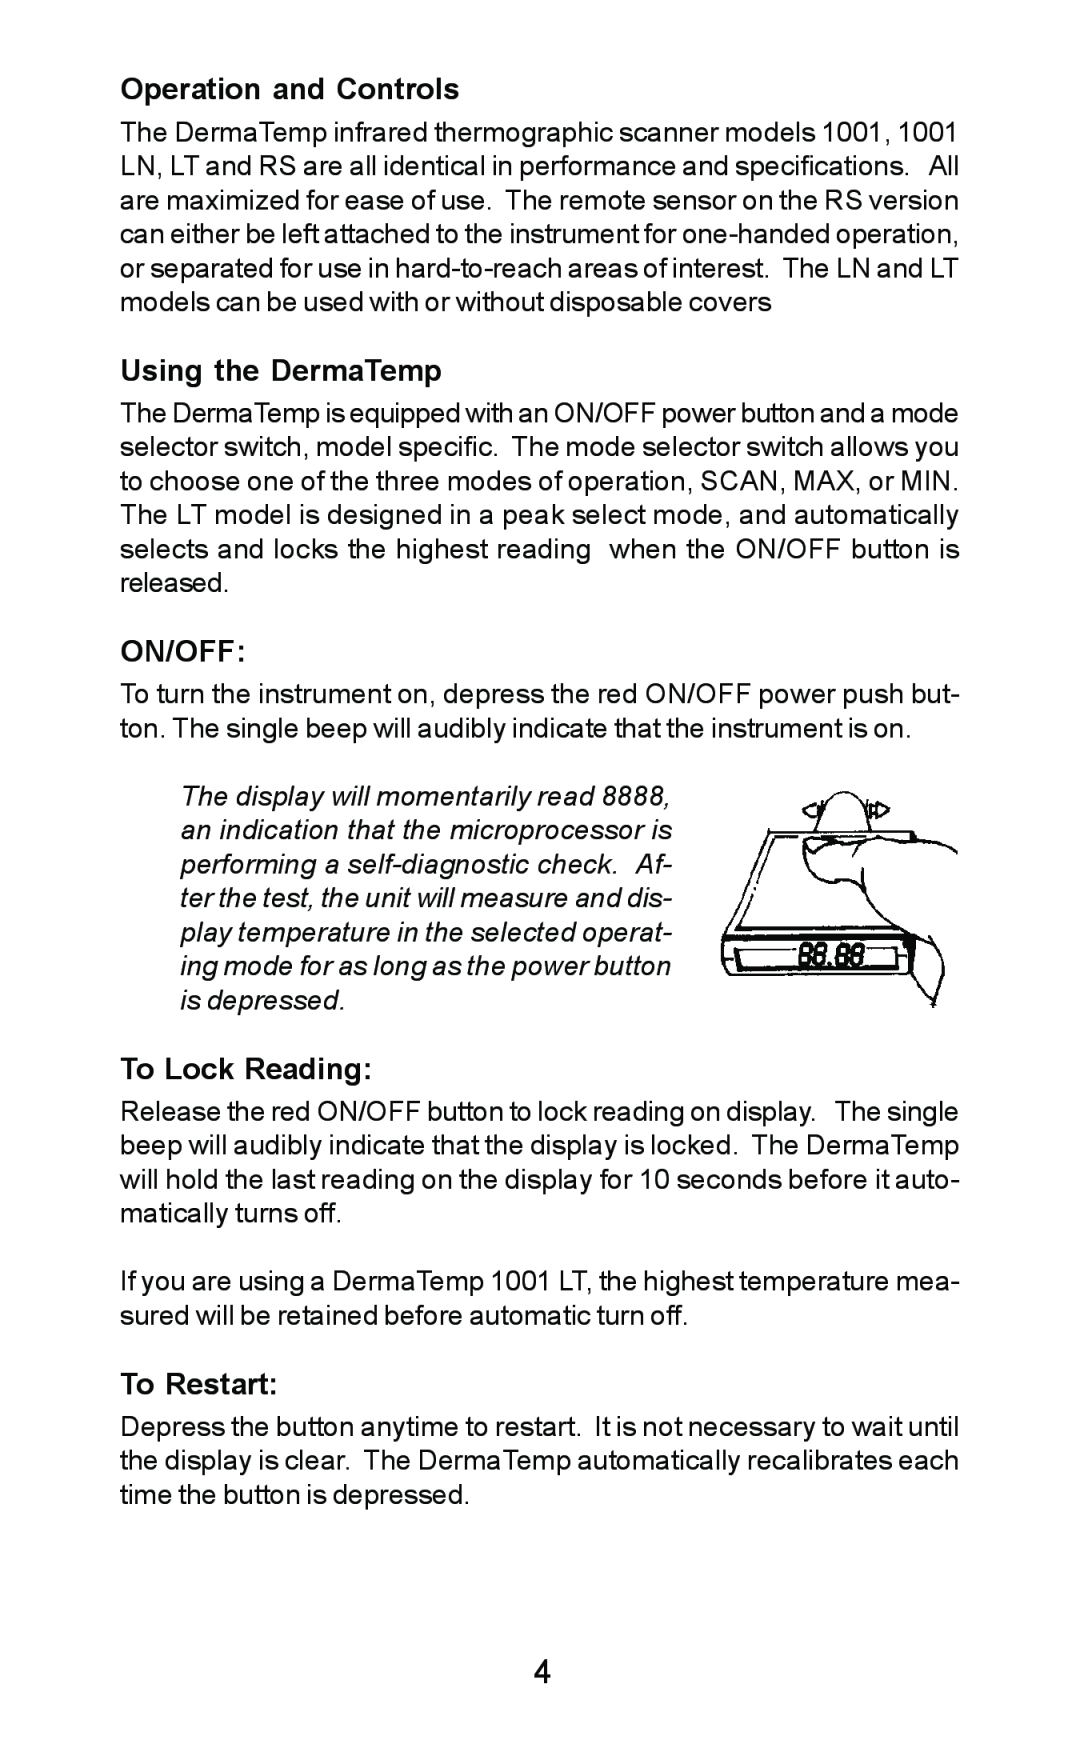 Exergen DT 1001-LN, DT 1001-RS, DT 1001-LT Operation and Controls, Using the DermaTemp, On/Off, To Lock Reading, To Restart 